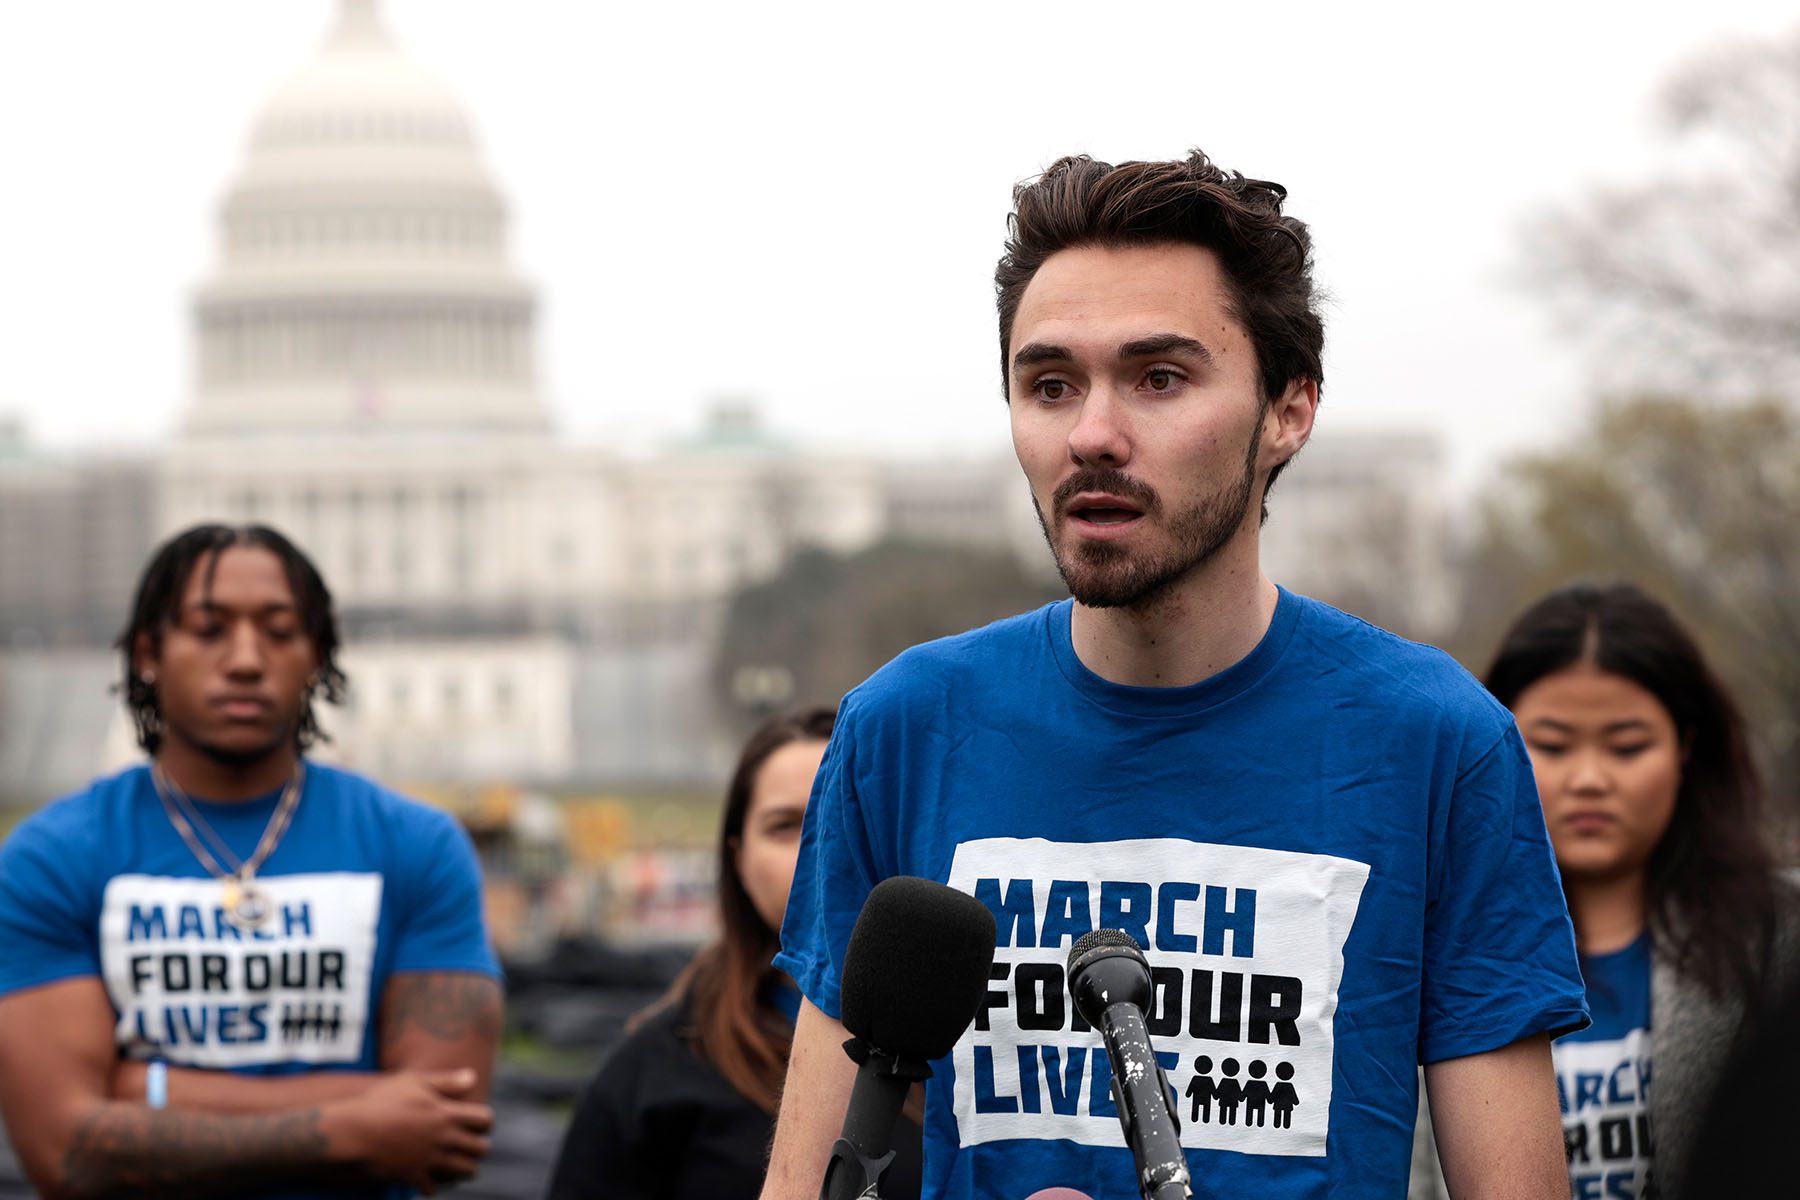 David Hogg speaks to reporters near the U.S. Capitol. He is wearing a "March for Our Lives" t-shirt.